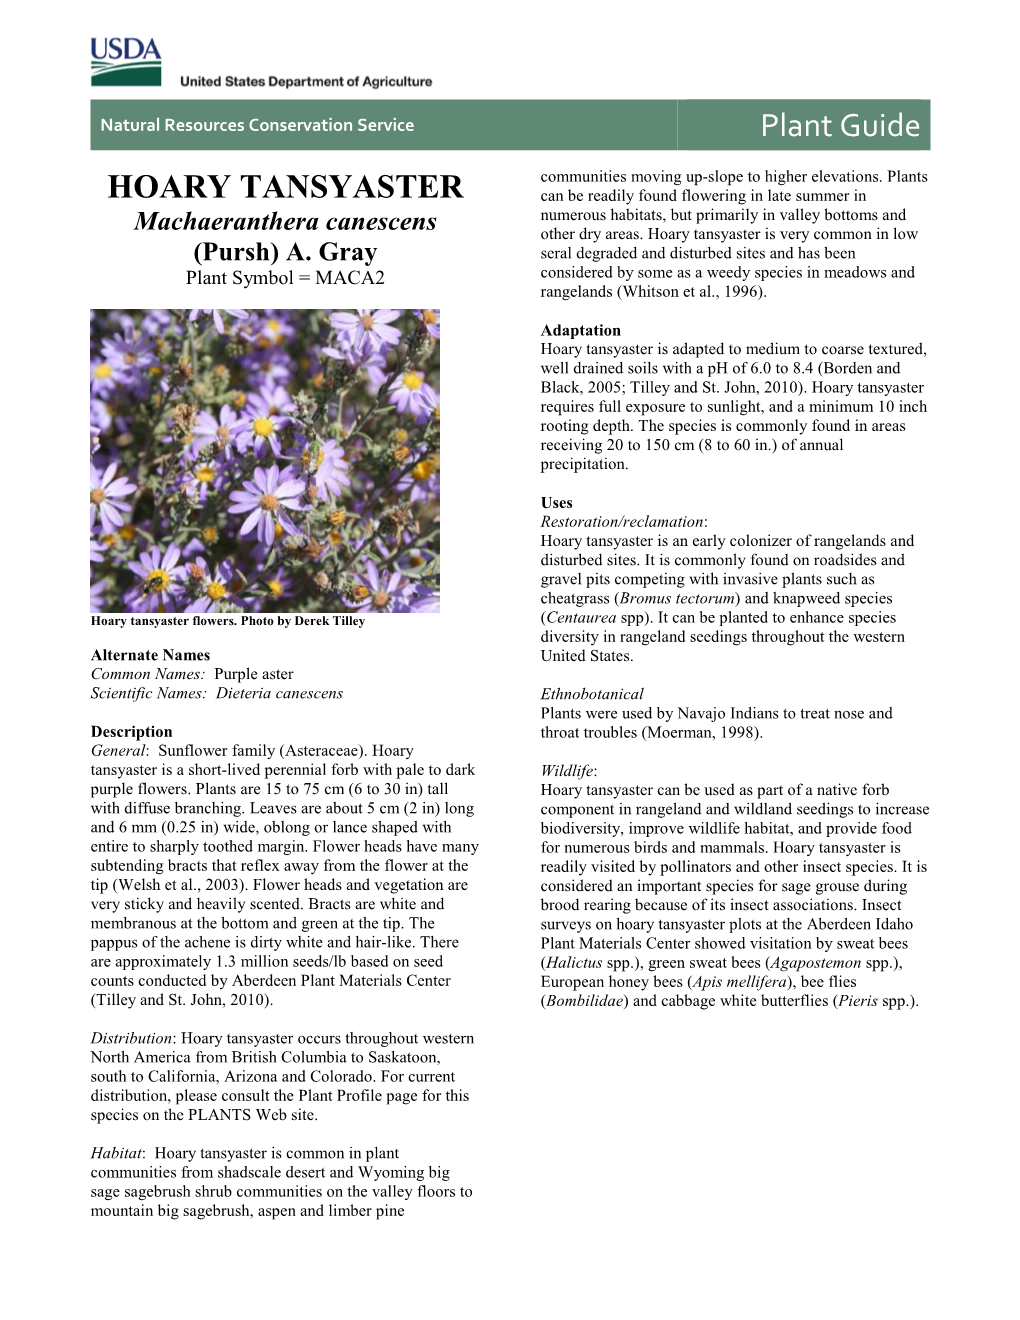 Plant Guide for Hoary Tansyaster (Machaeranthera Canescens)